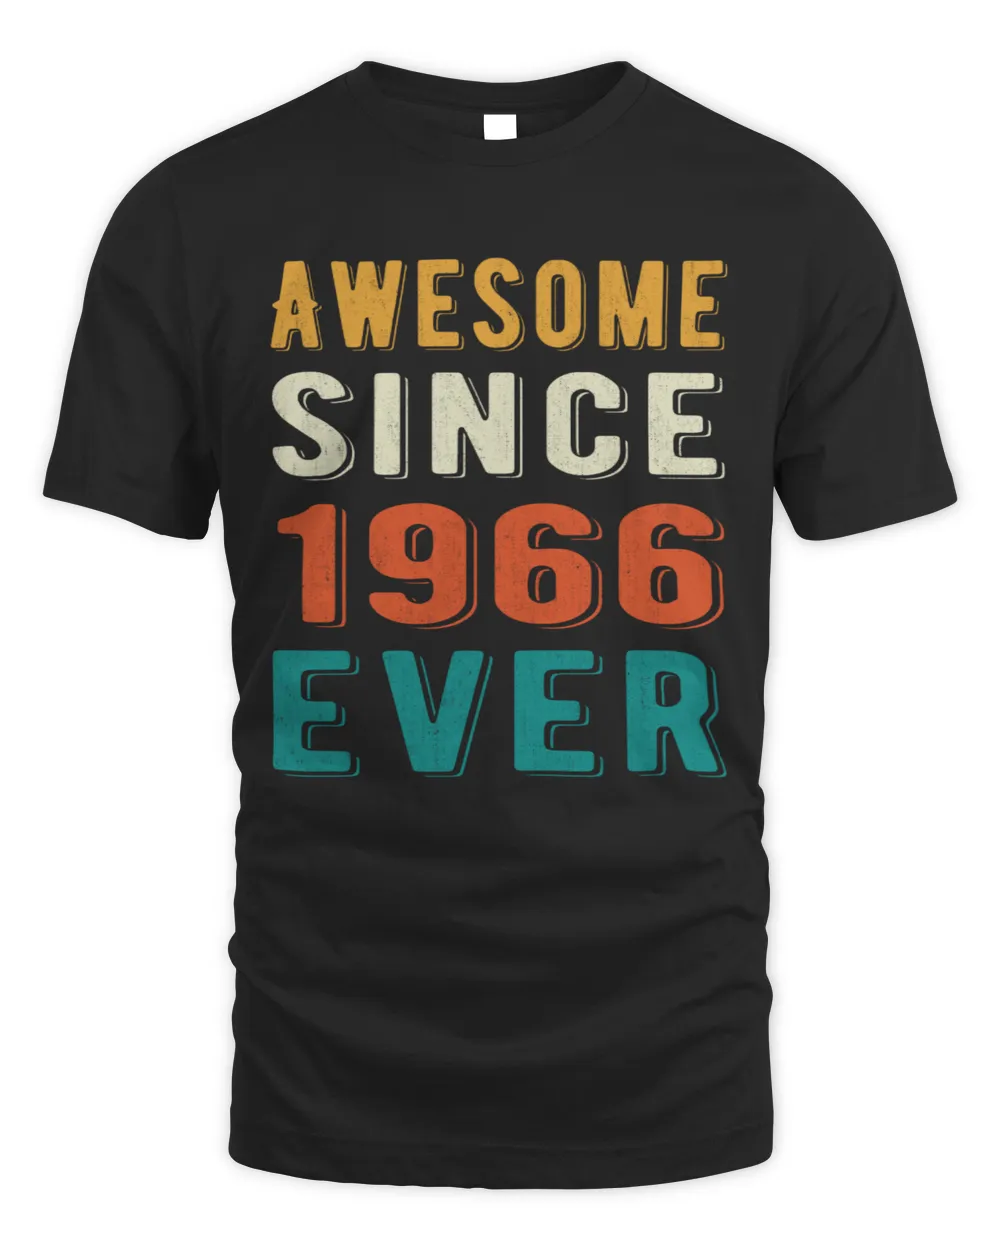 Awesome since 1966 ever Retro style 55th birthday gift